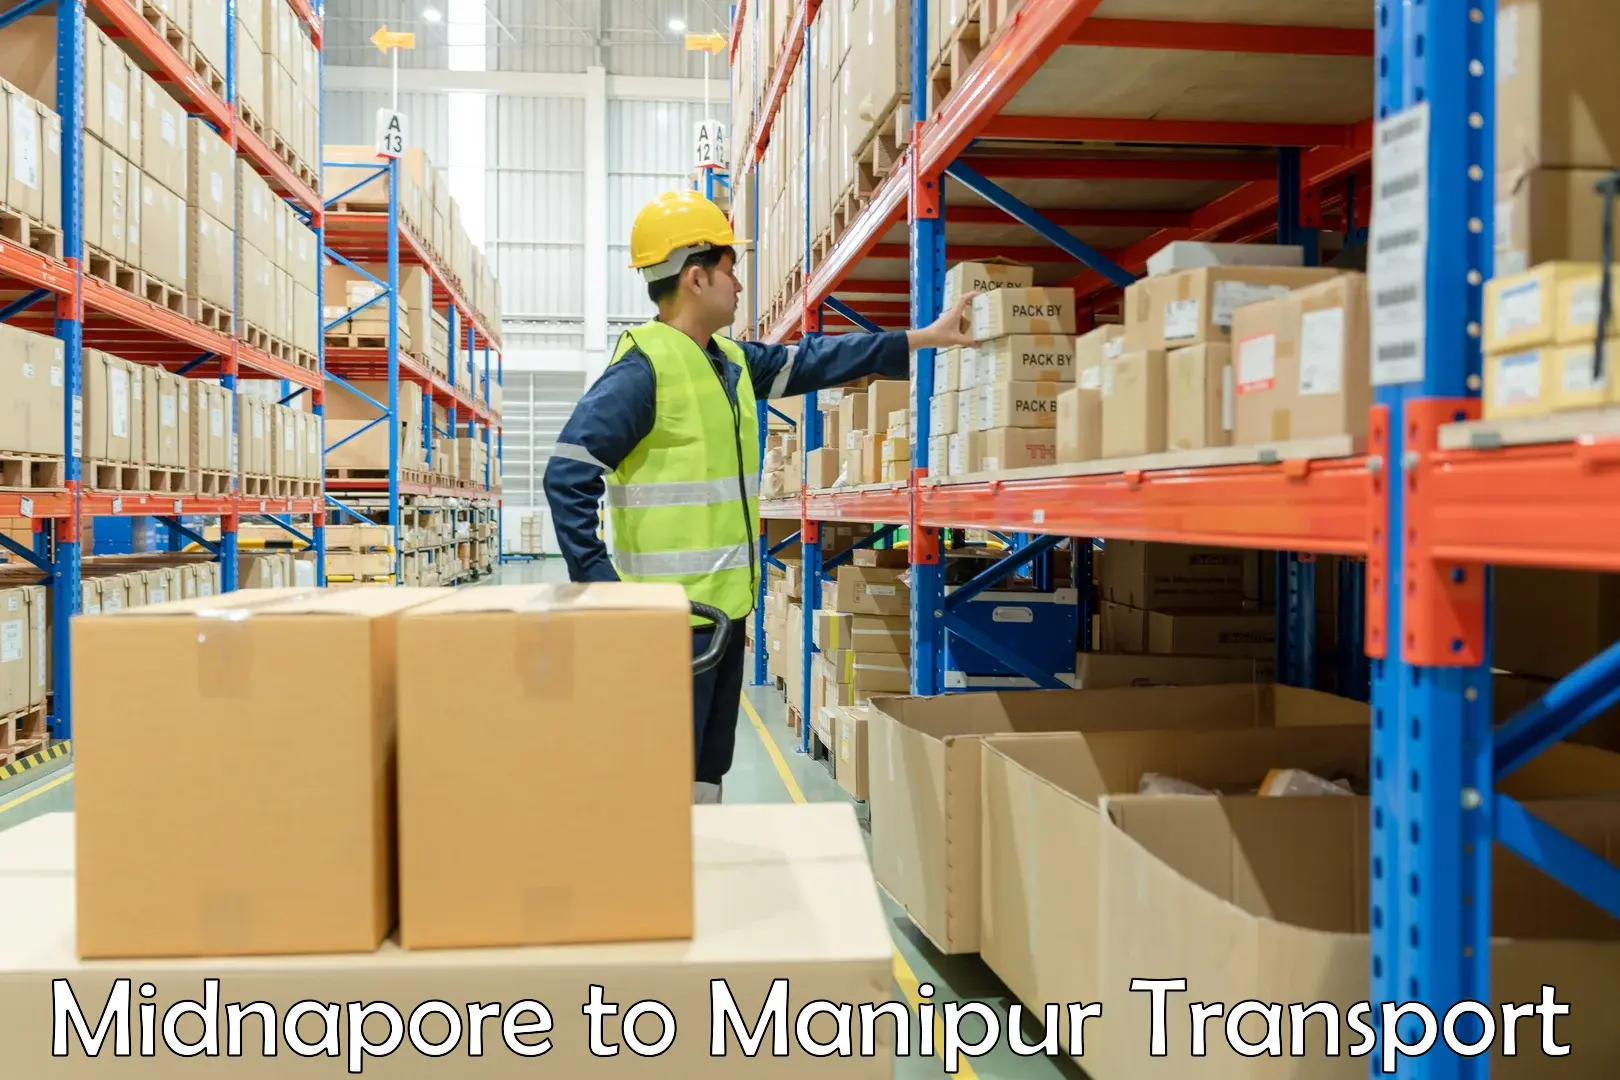 Truck transport companies in India Midnapore to Chandel